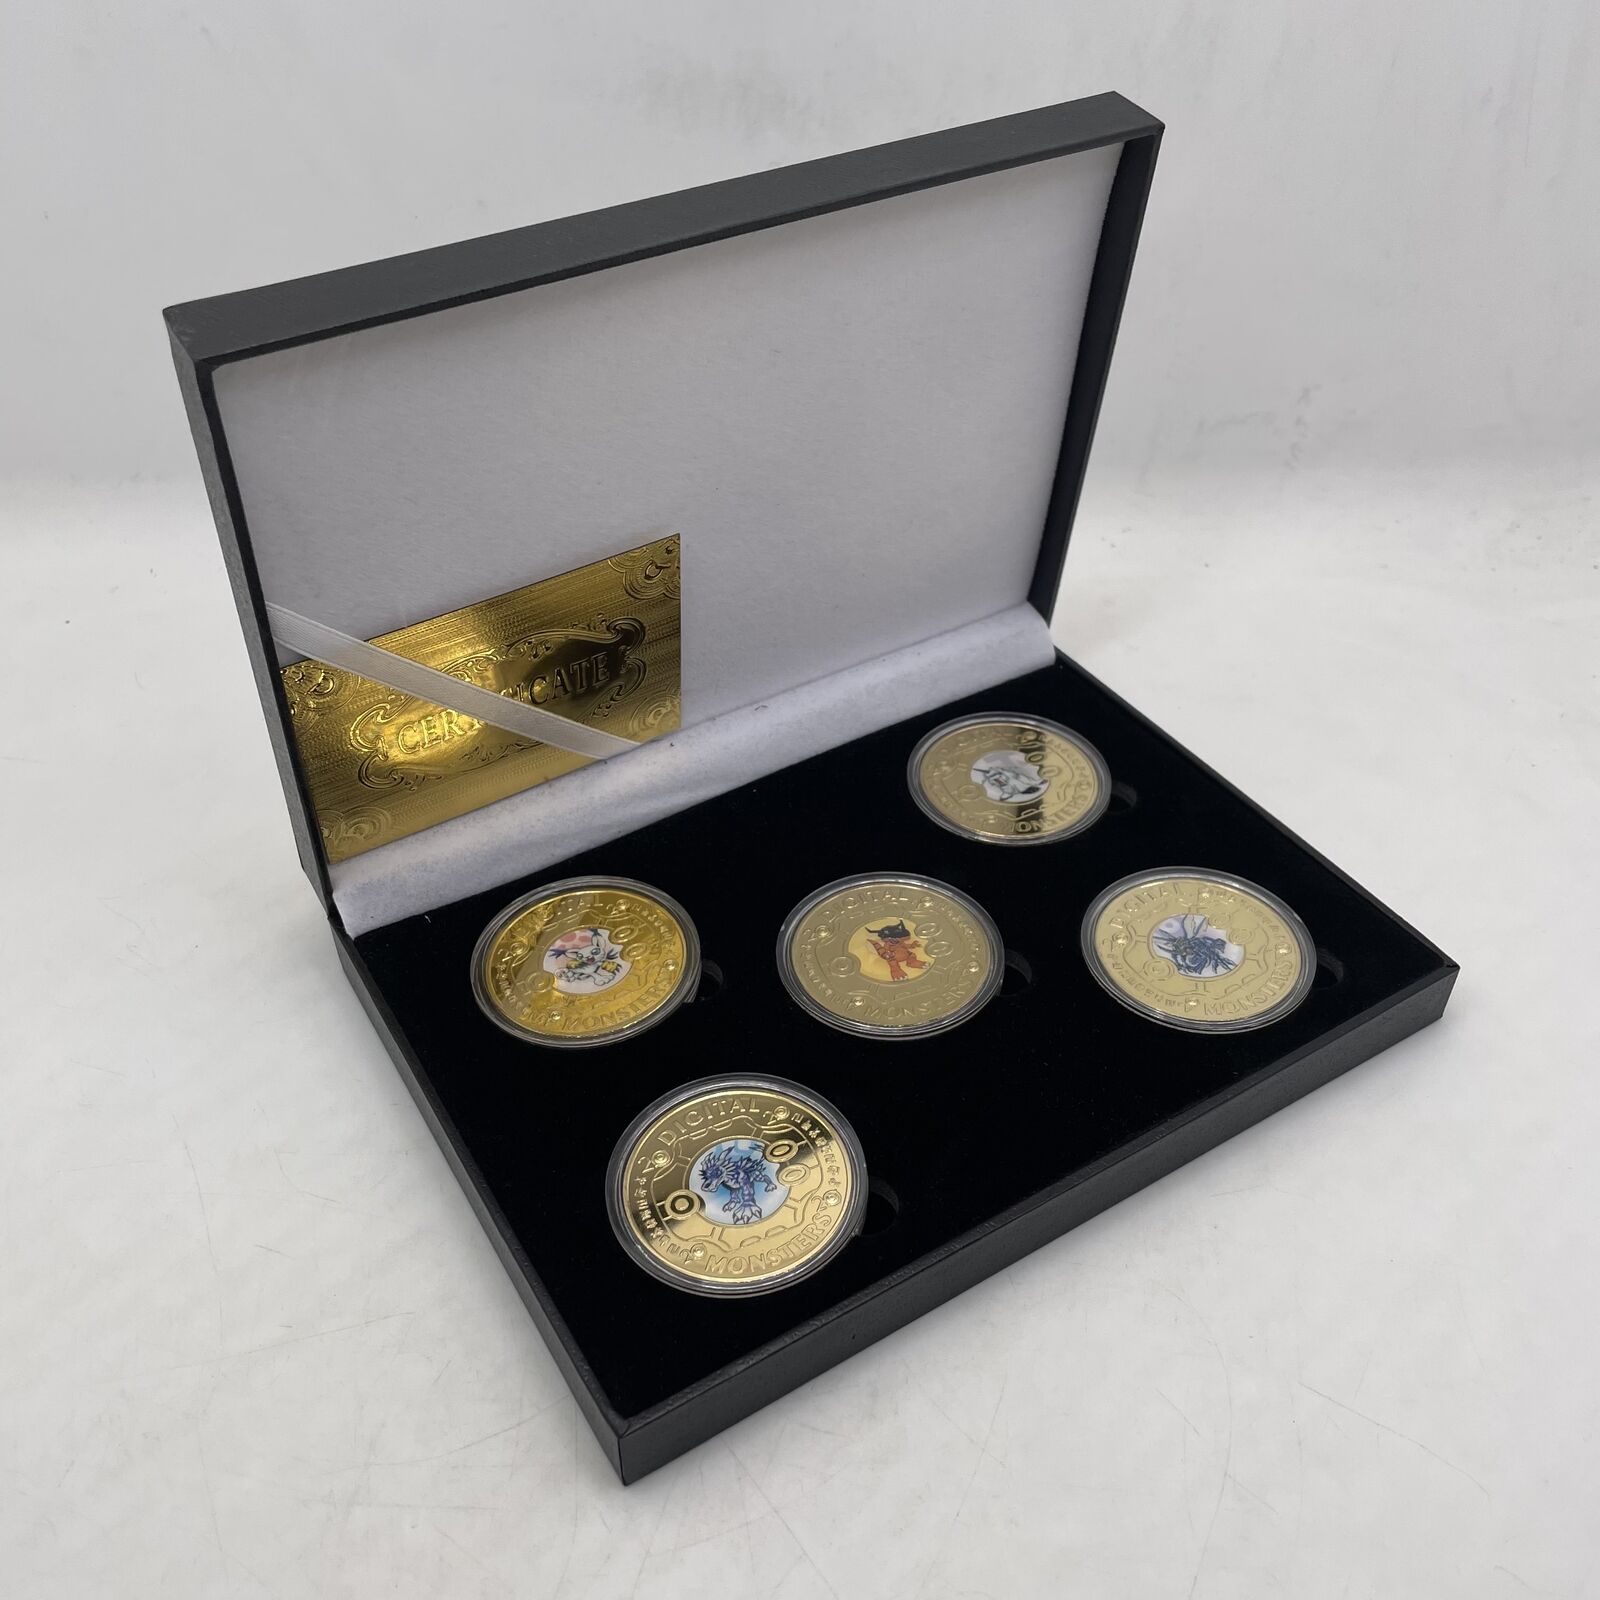 5pcs Digital monster Anime gold plated coin in box manga cartoon collectibles